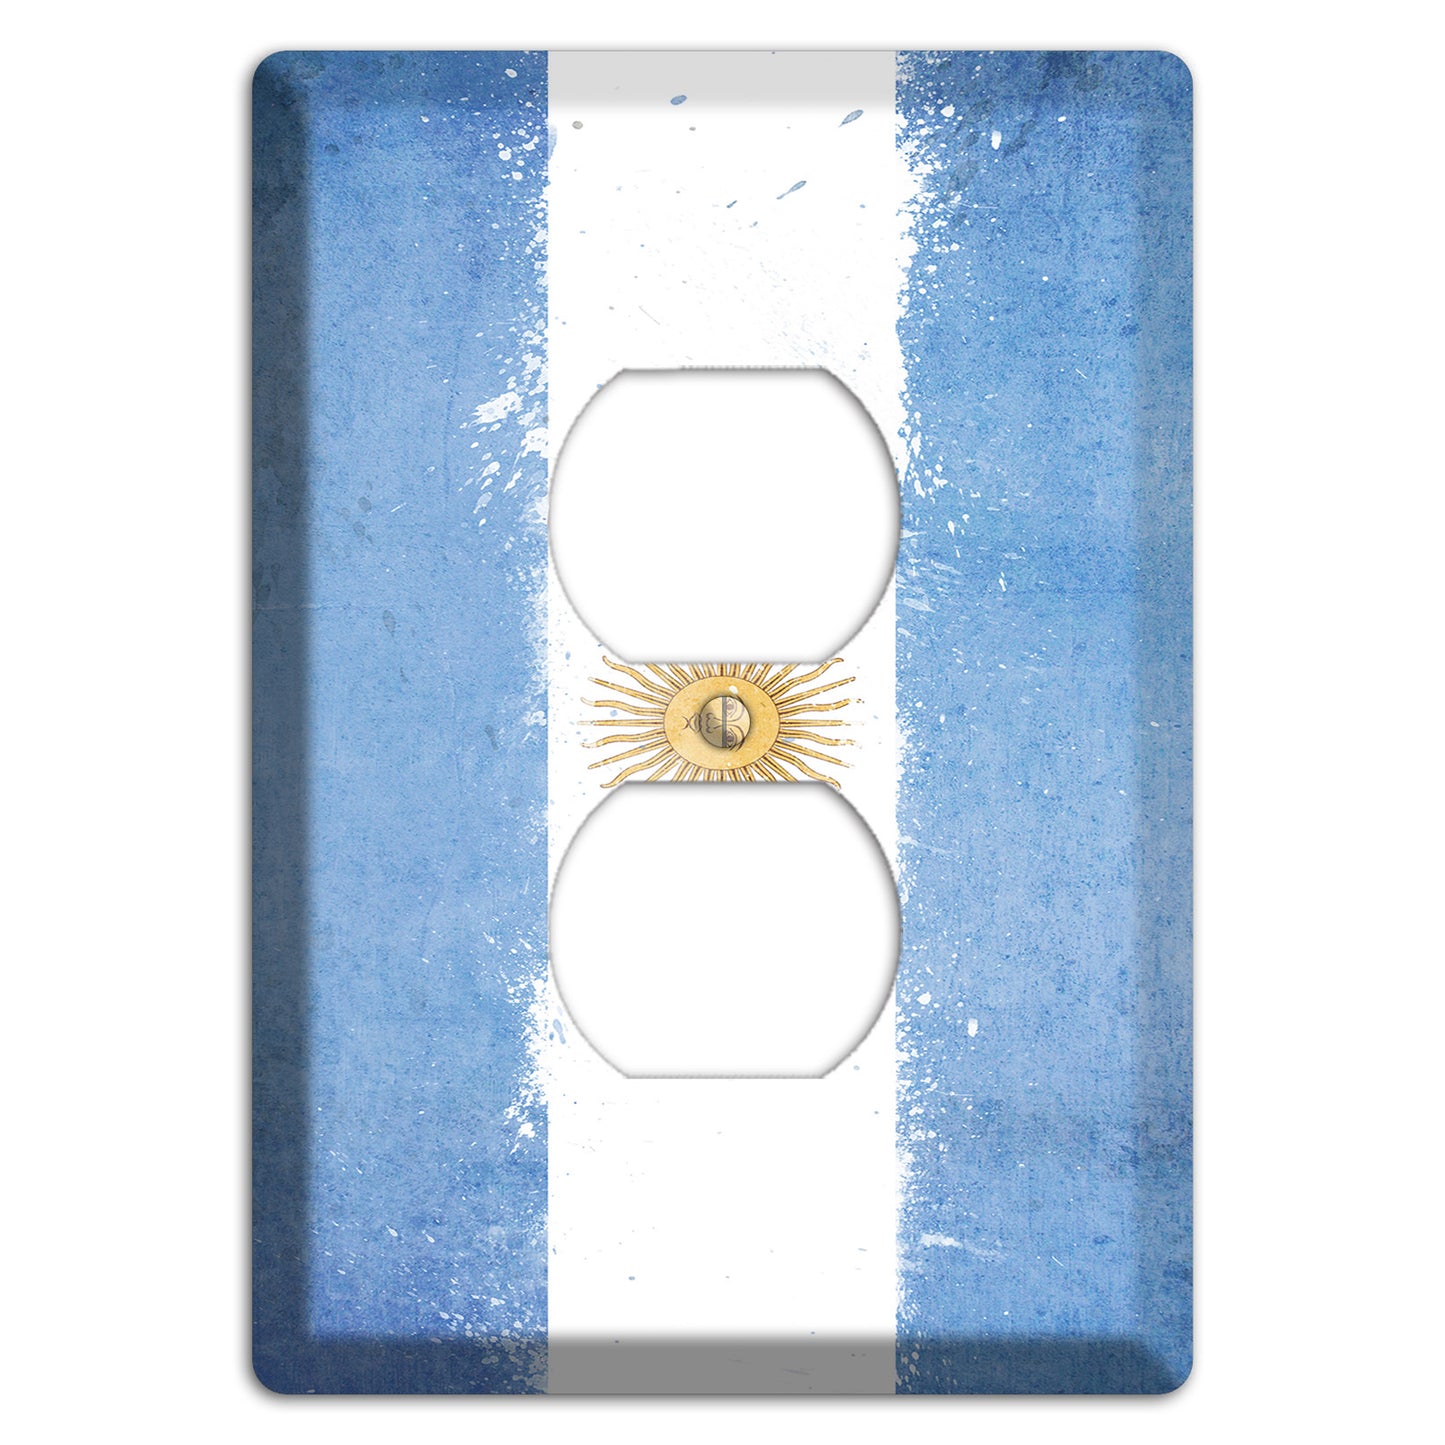 Argentina Cover Plates Duplex Outlet Wallplate